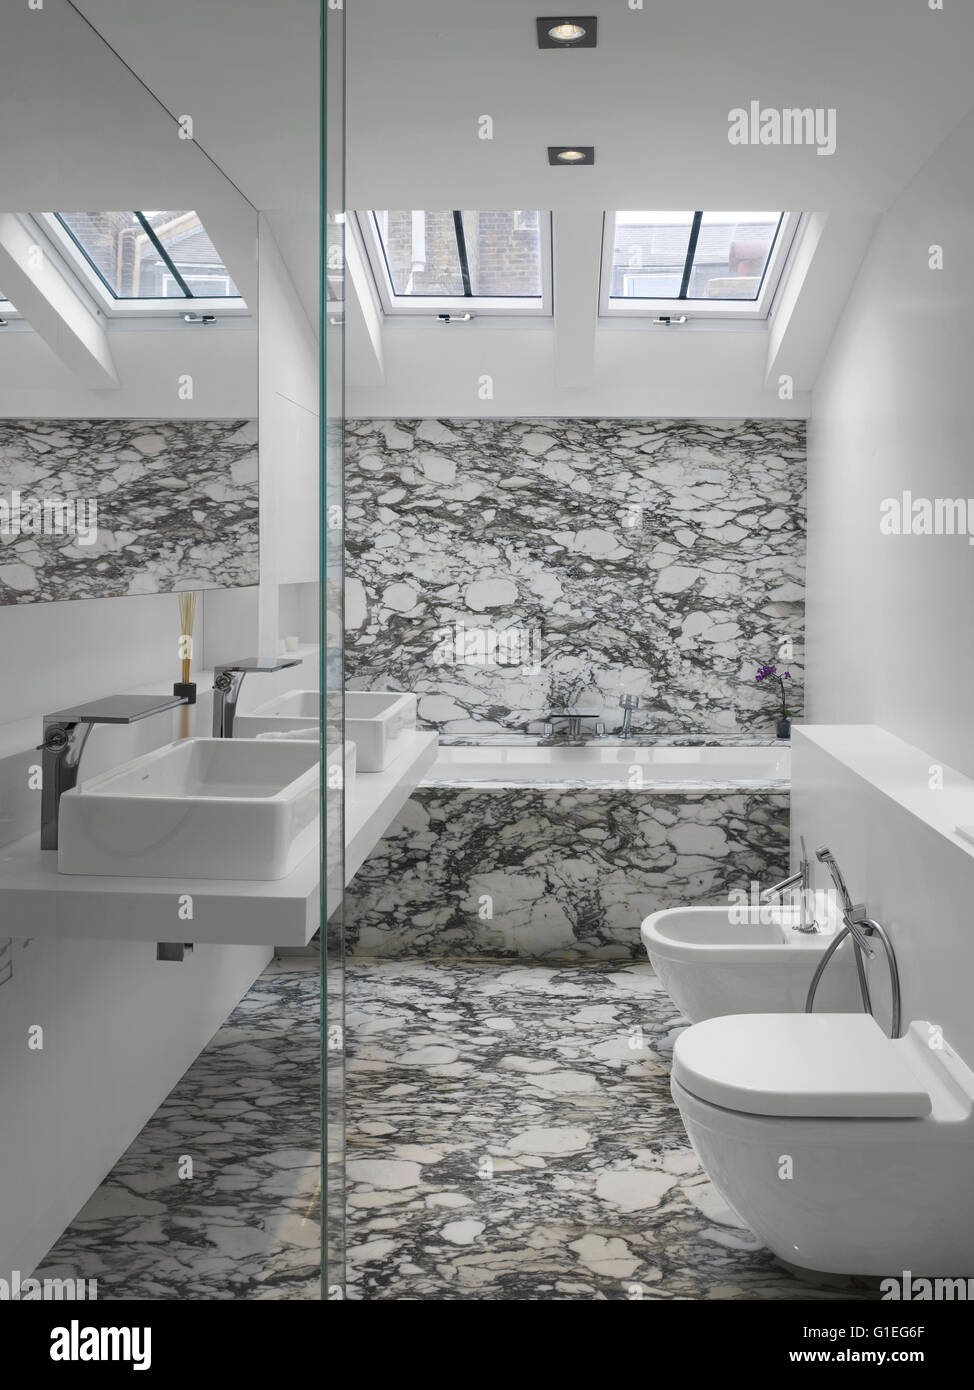 One of a number of bathrooms. Modern bathroom with sleek features and marble walls and floor. Stock Photo